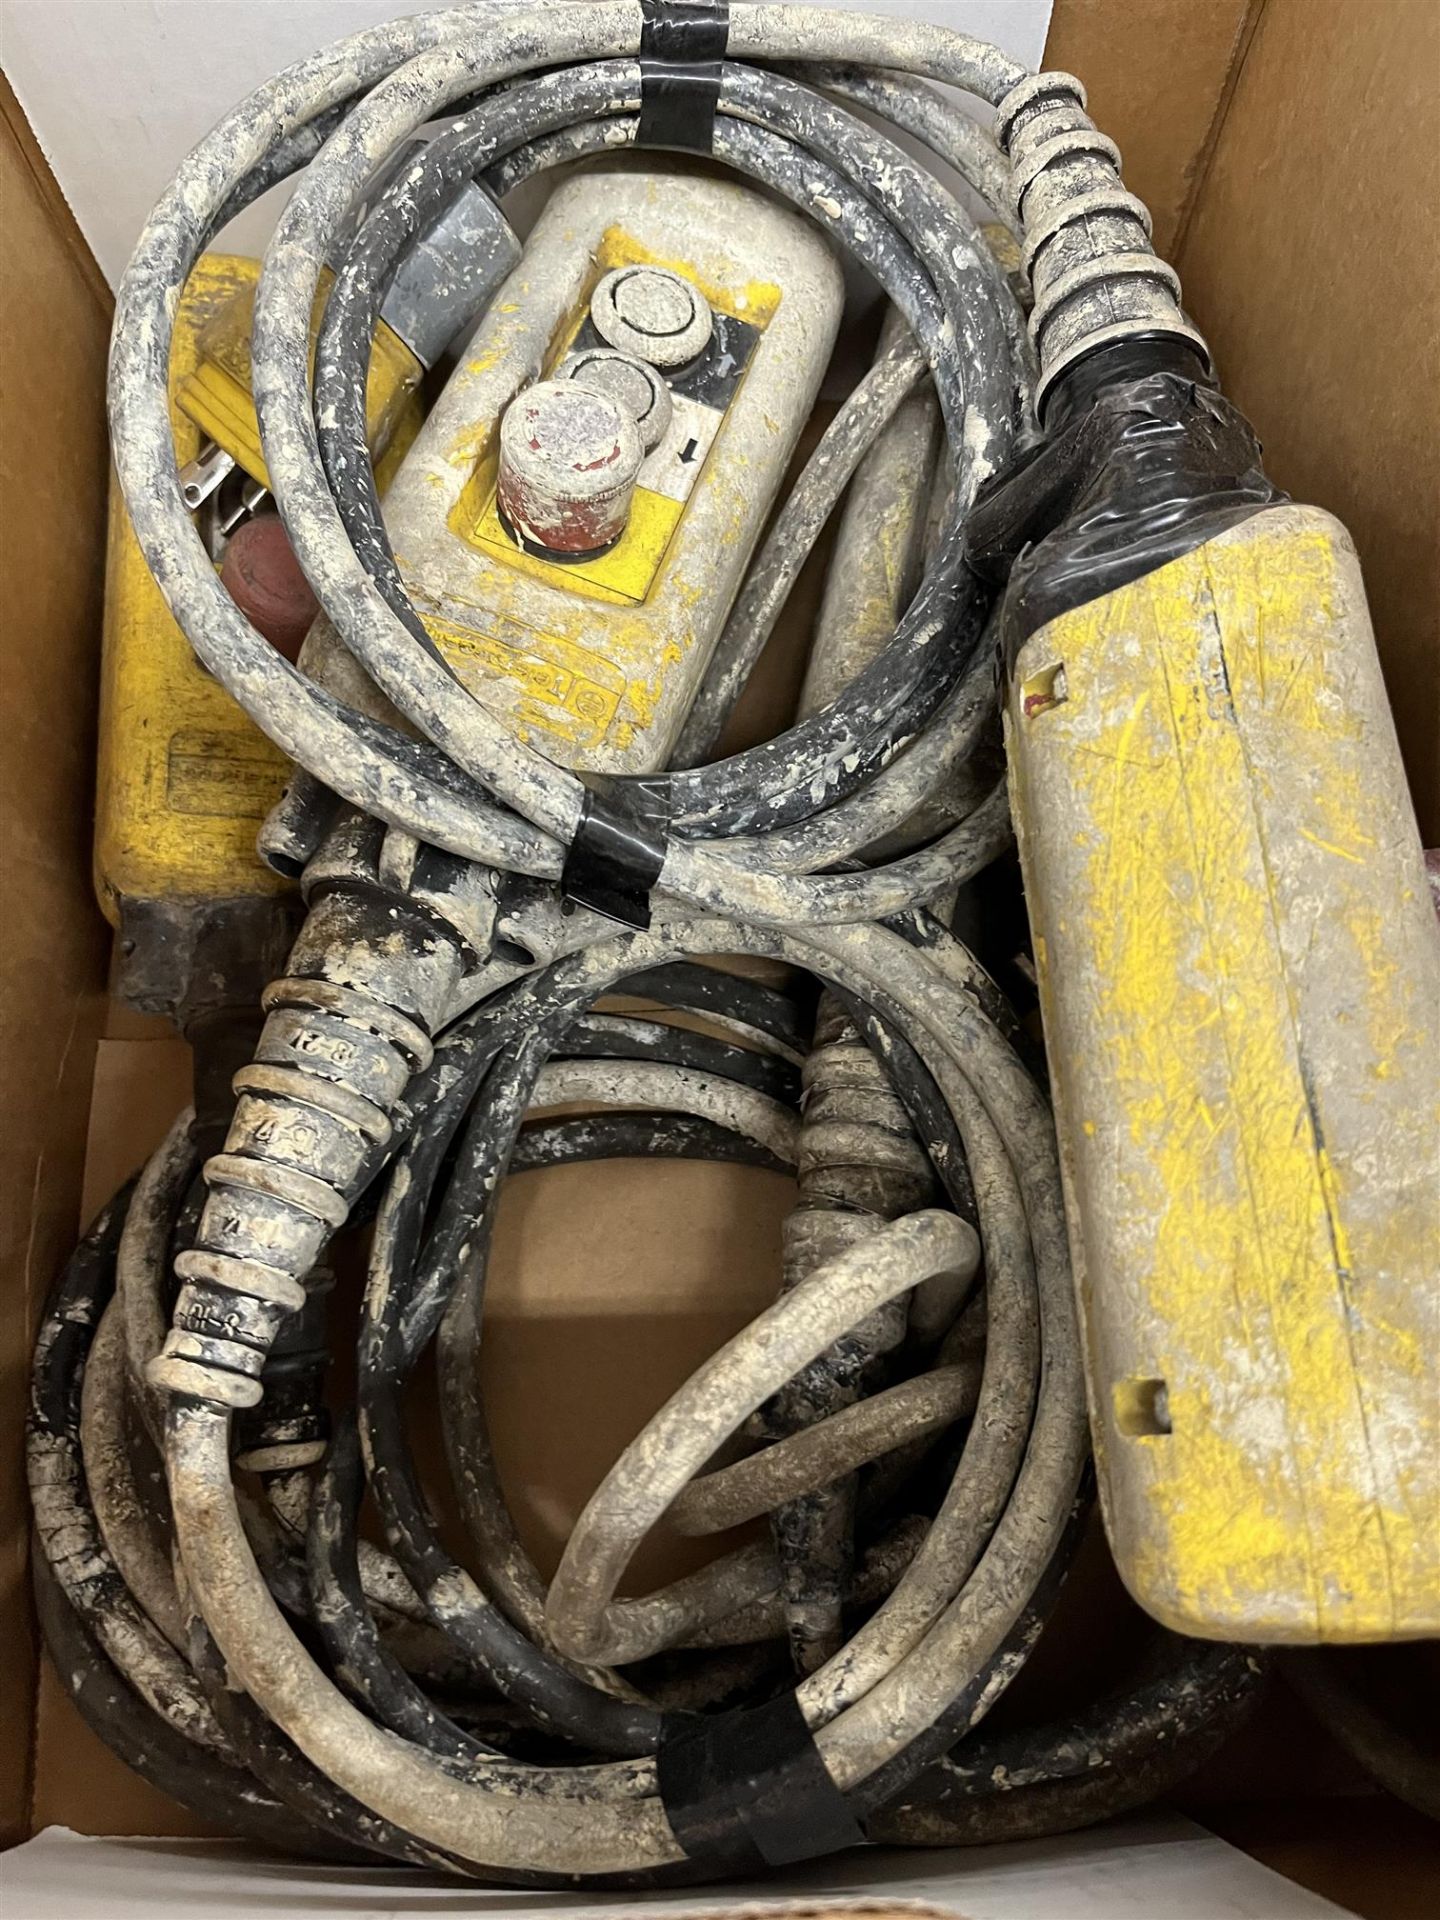 Electric Controller for Hoist - 4 Pieces - Image 2 of 2